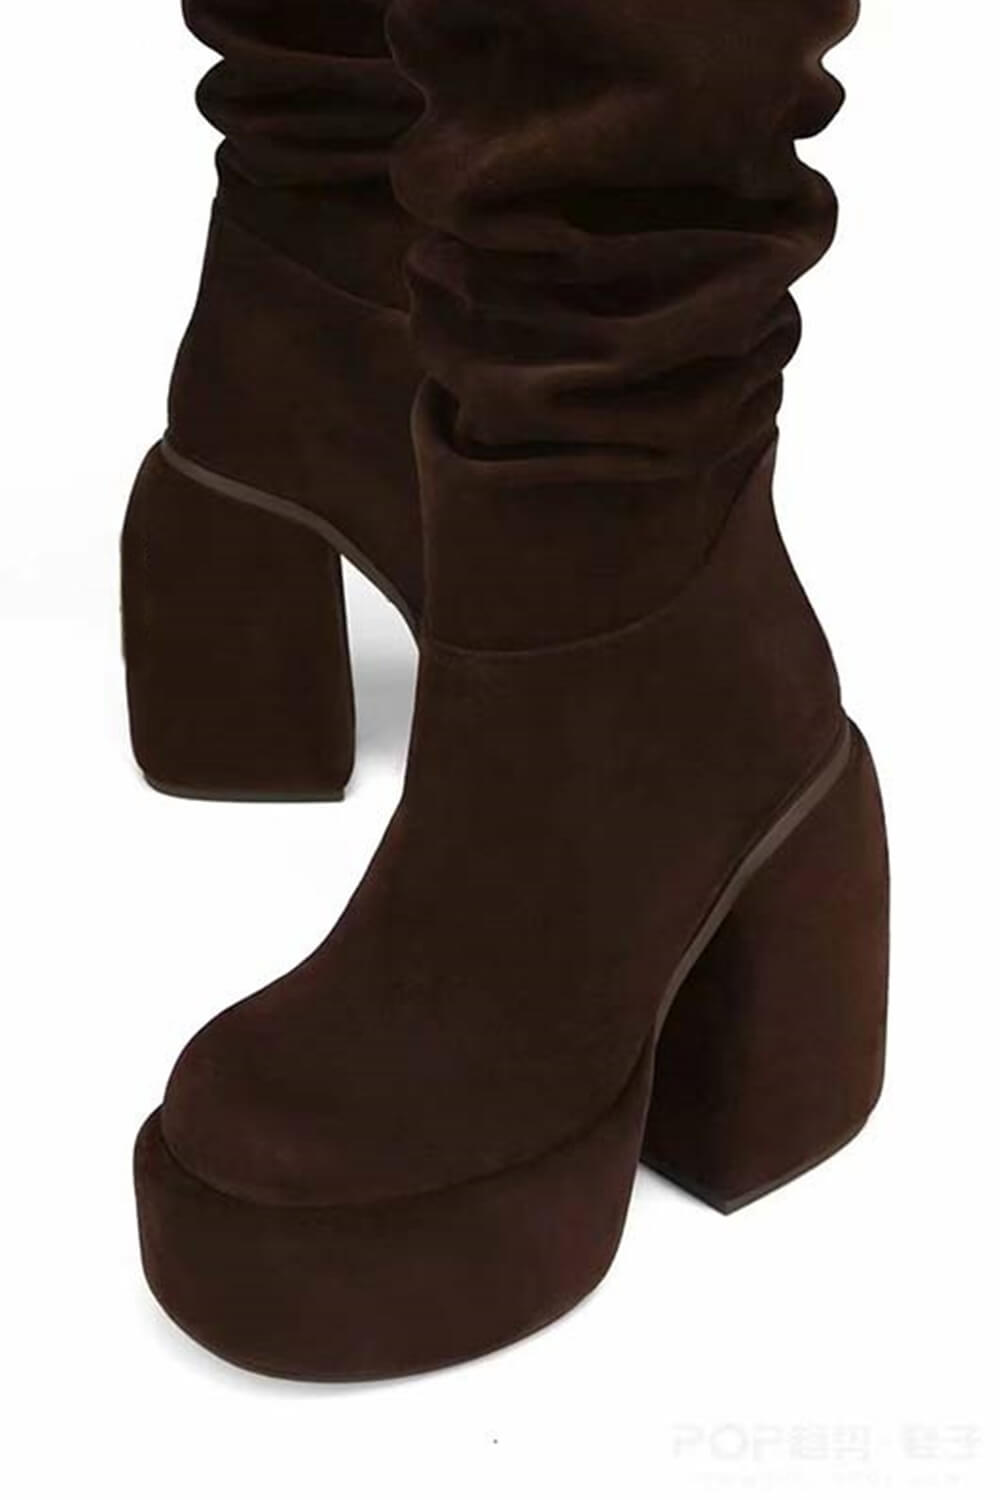 Faux Suede Ruched Round Toe Chunky Platform Block Heel Knee High Boot - Chocolate